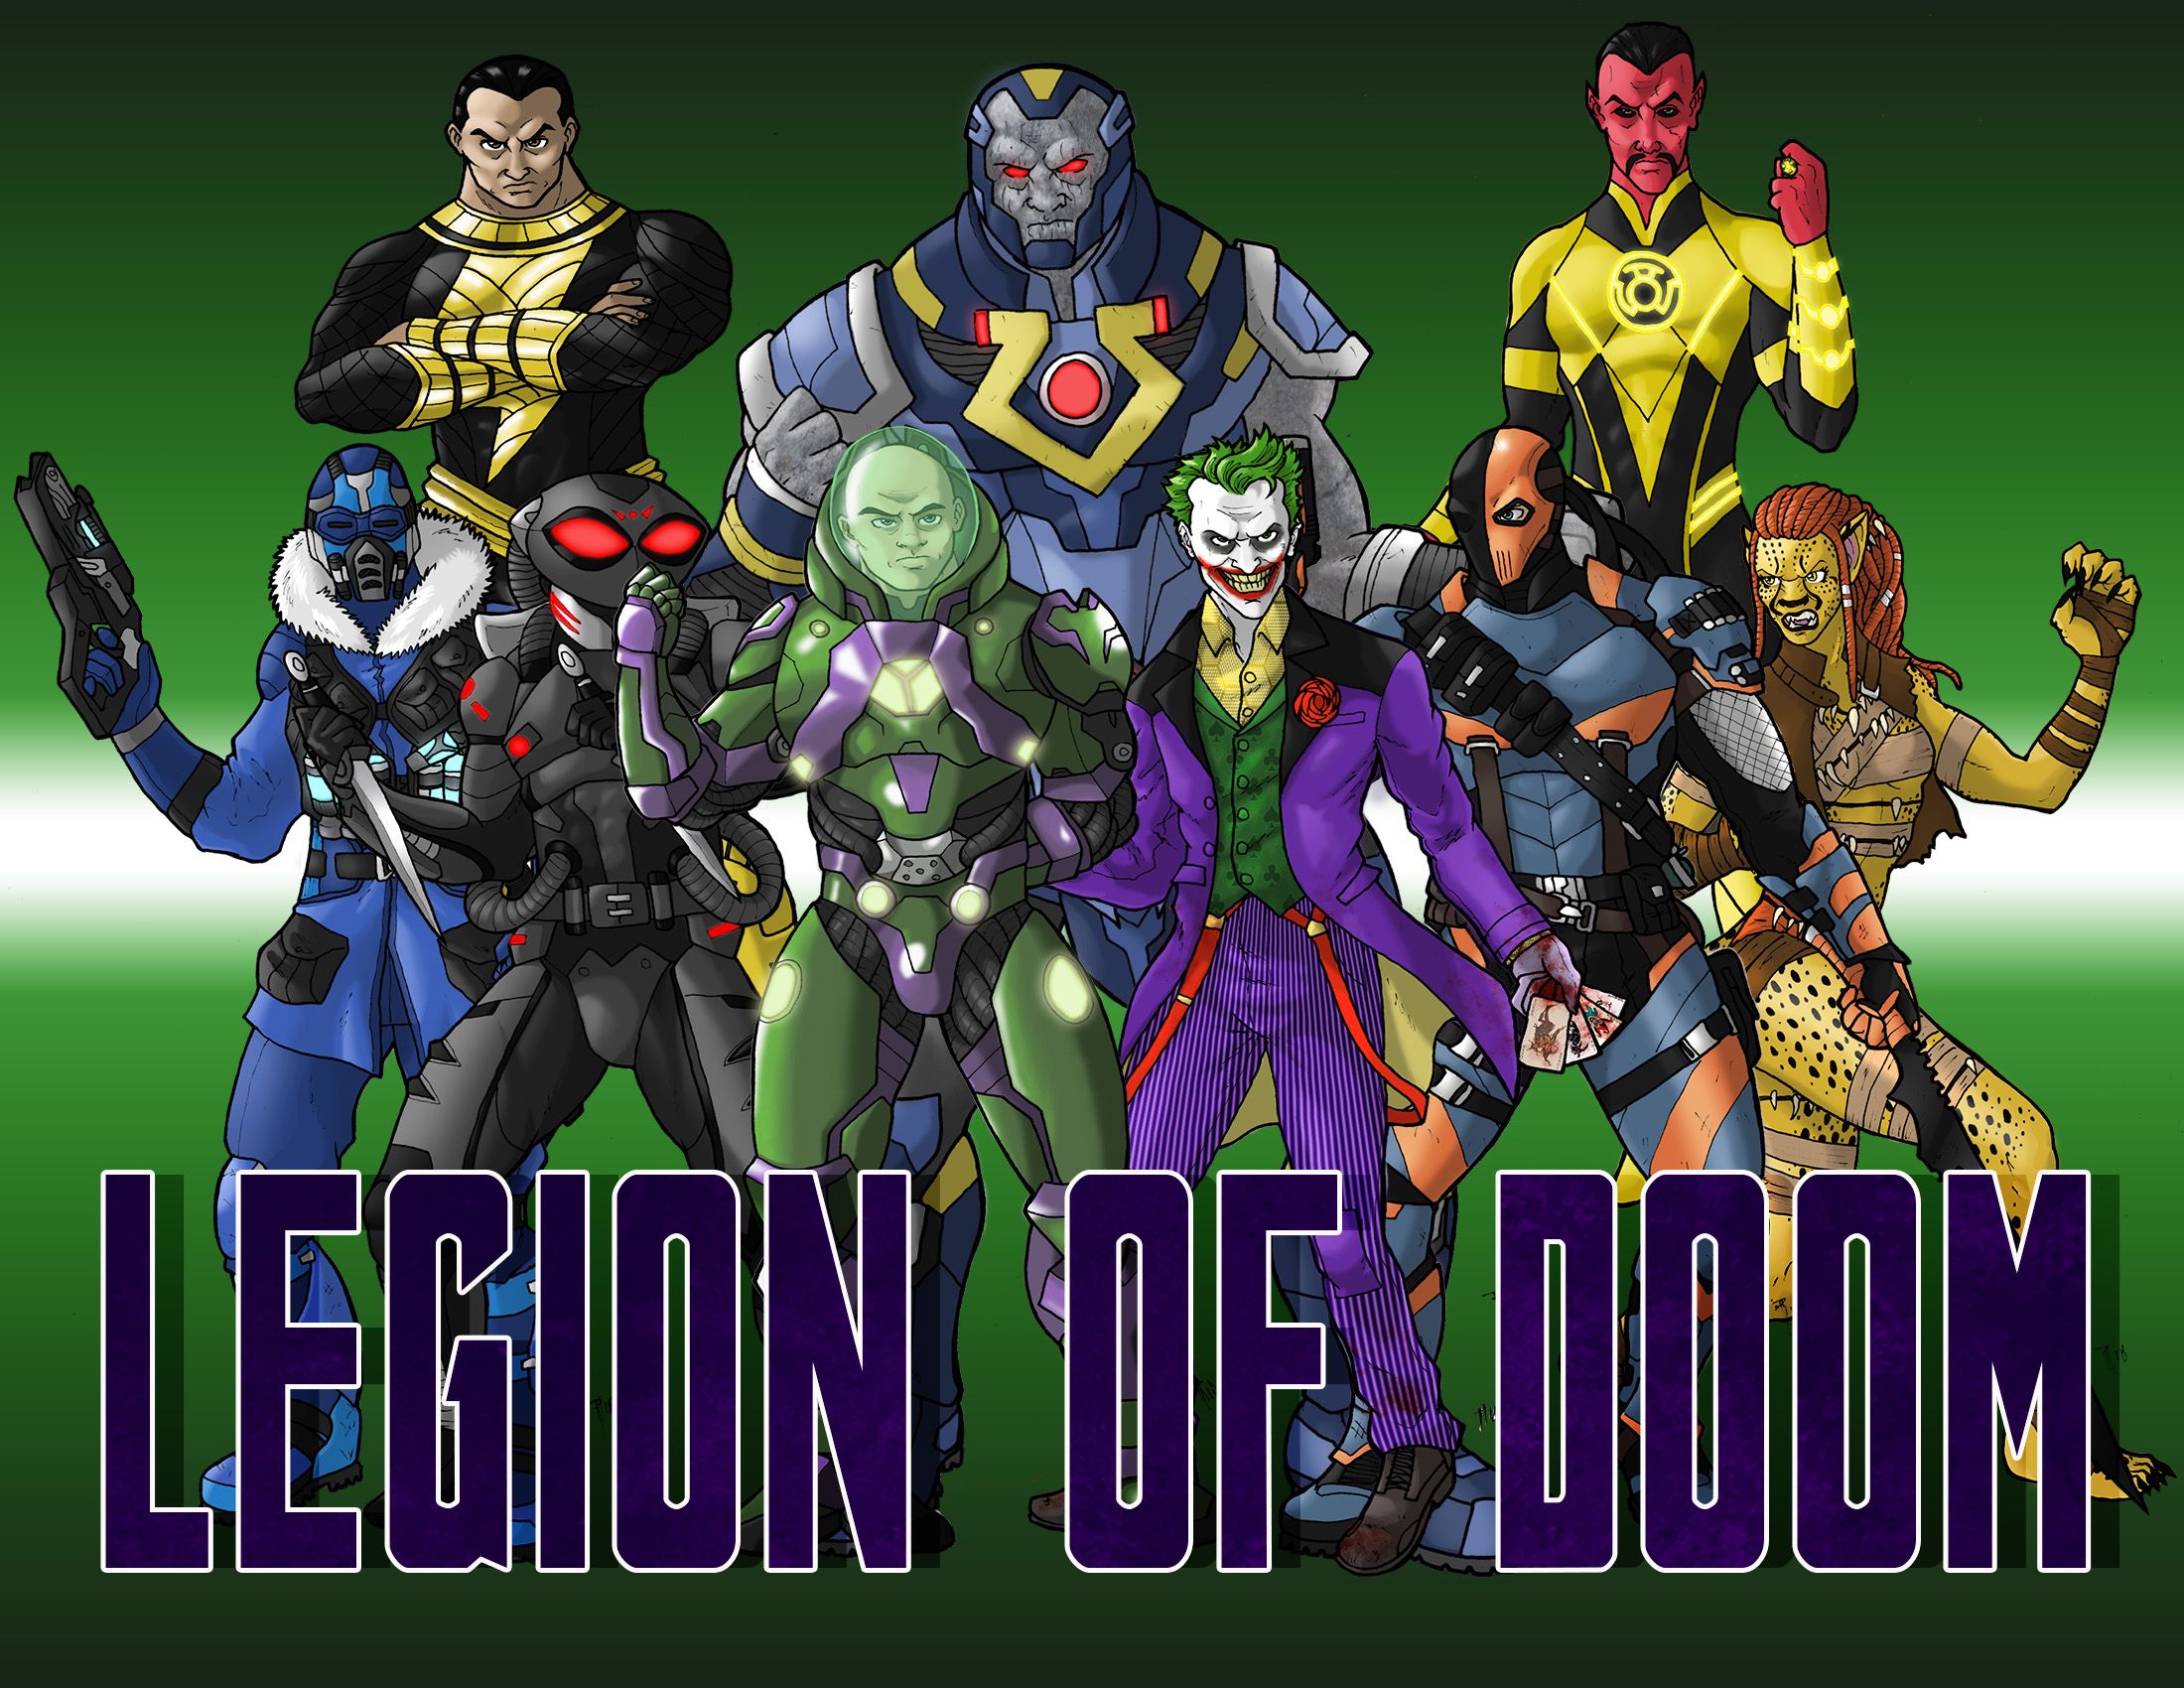 10 Legion of Doom Fan Art Pictures That Will Make The Universe Tremble